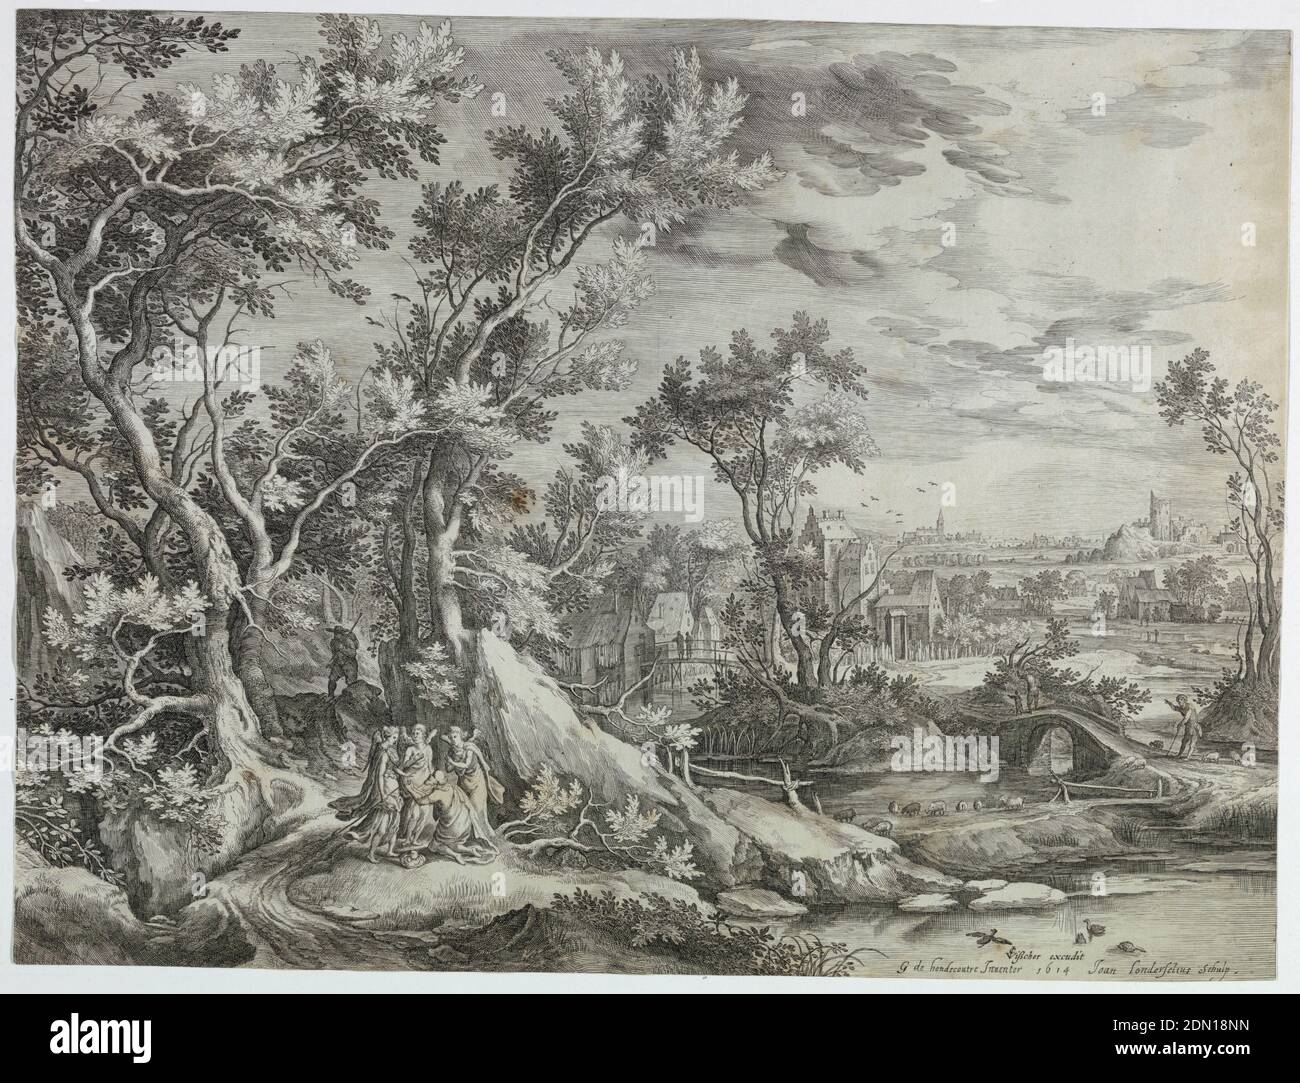 Landscape with Abraham and the Three Angels, Johannes van Londerseel, Flemish, ca. 1570 - ca. 1624, Gysbert Gillisz. de Hondecoeter, Dutch, 1604 - 1653, Cornelis Visscher, Netherlandish, 1629-1658, Engraved on white paper, Landscape with threes and a roat at right. Kneeling Abraham and three angels on it. Left mid-distance several houses; a church and ruins of a castle at horizon., Netherlands, 1614, Print Stock Photo